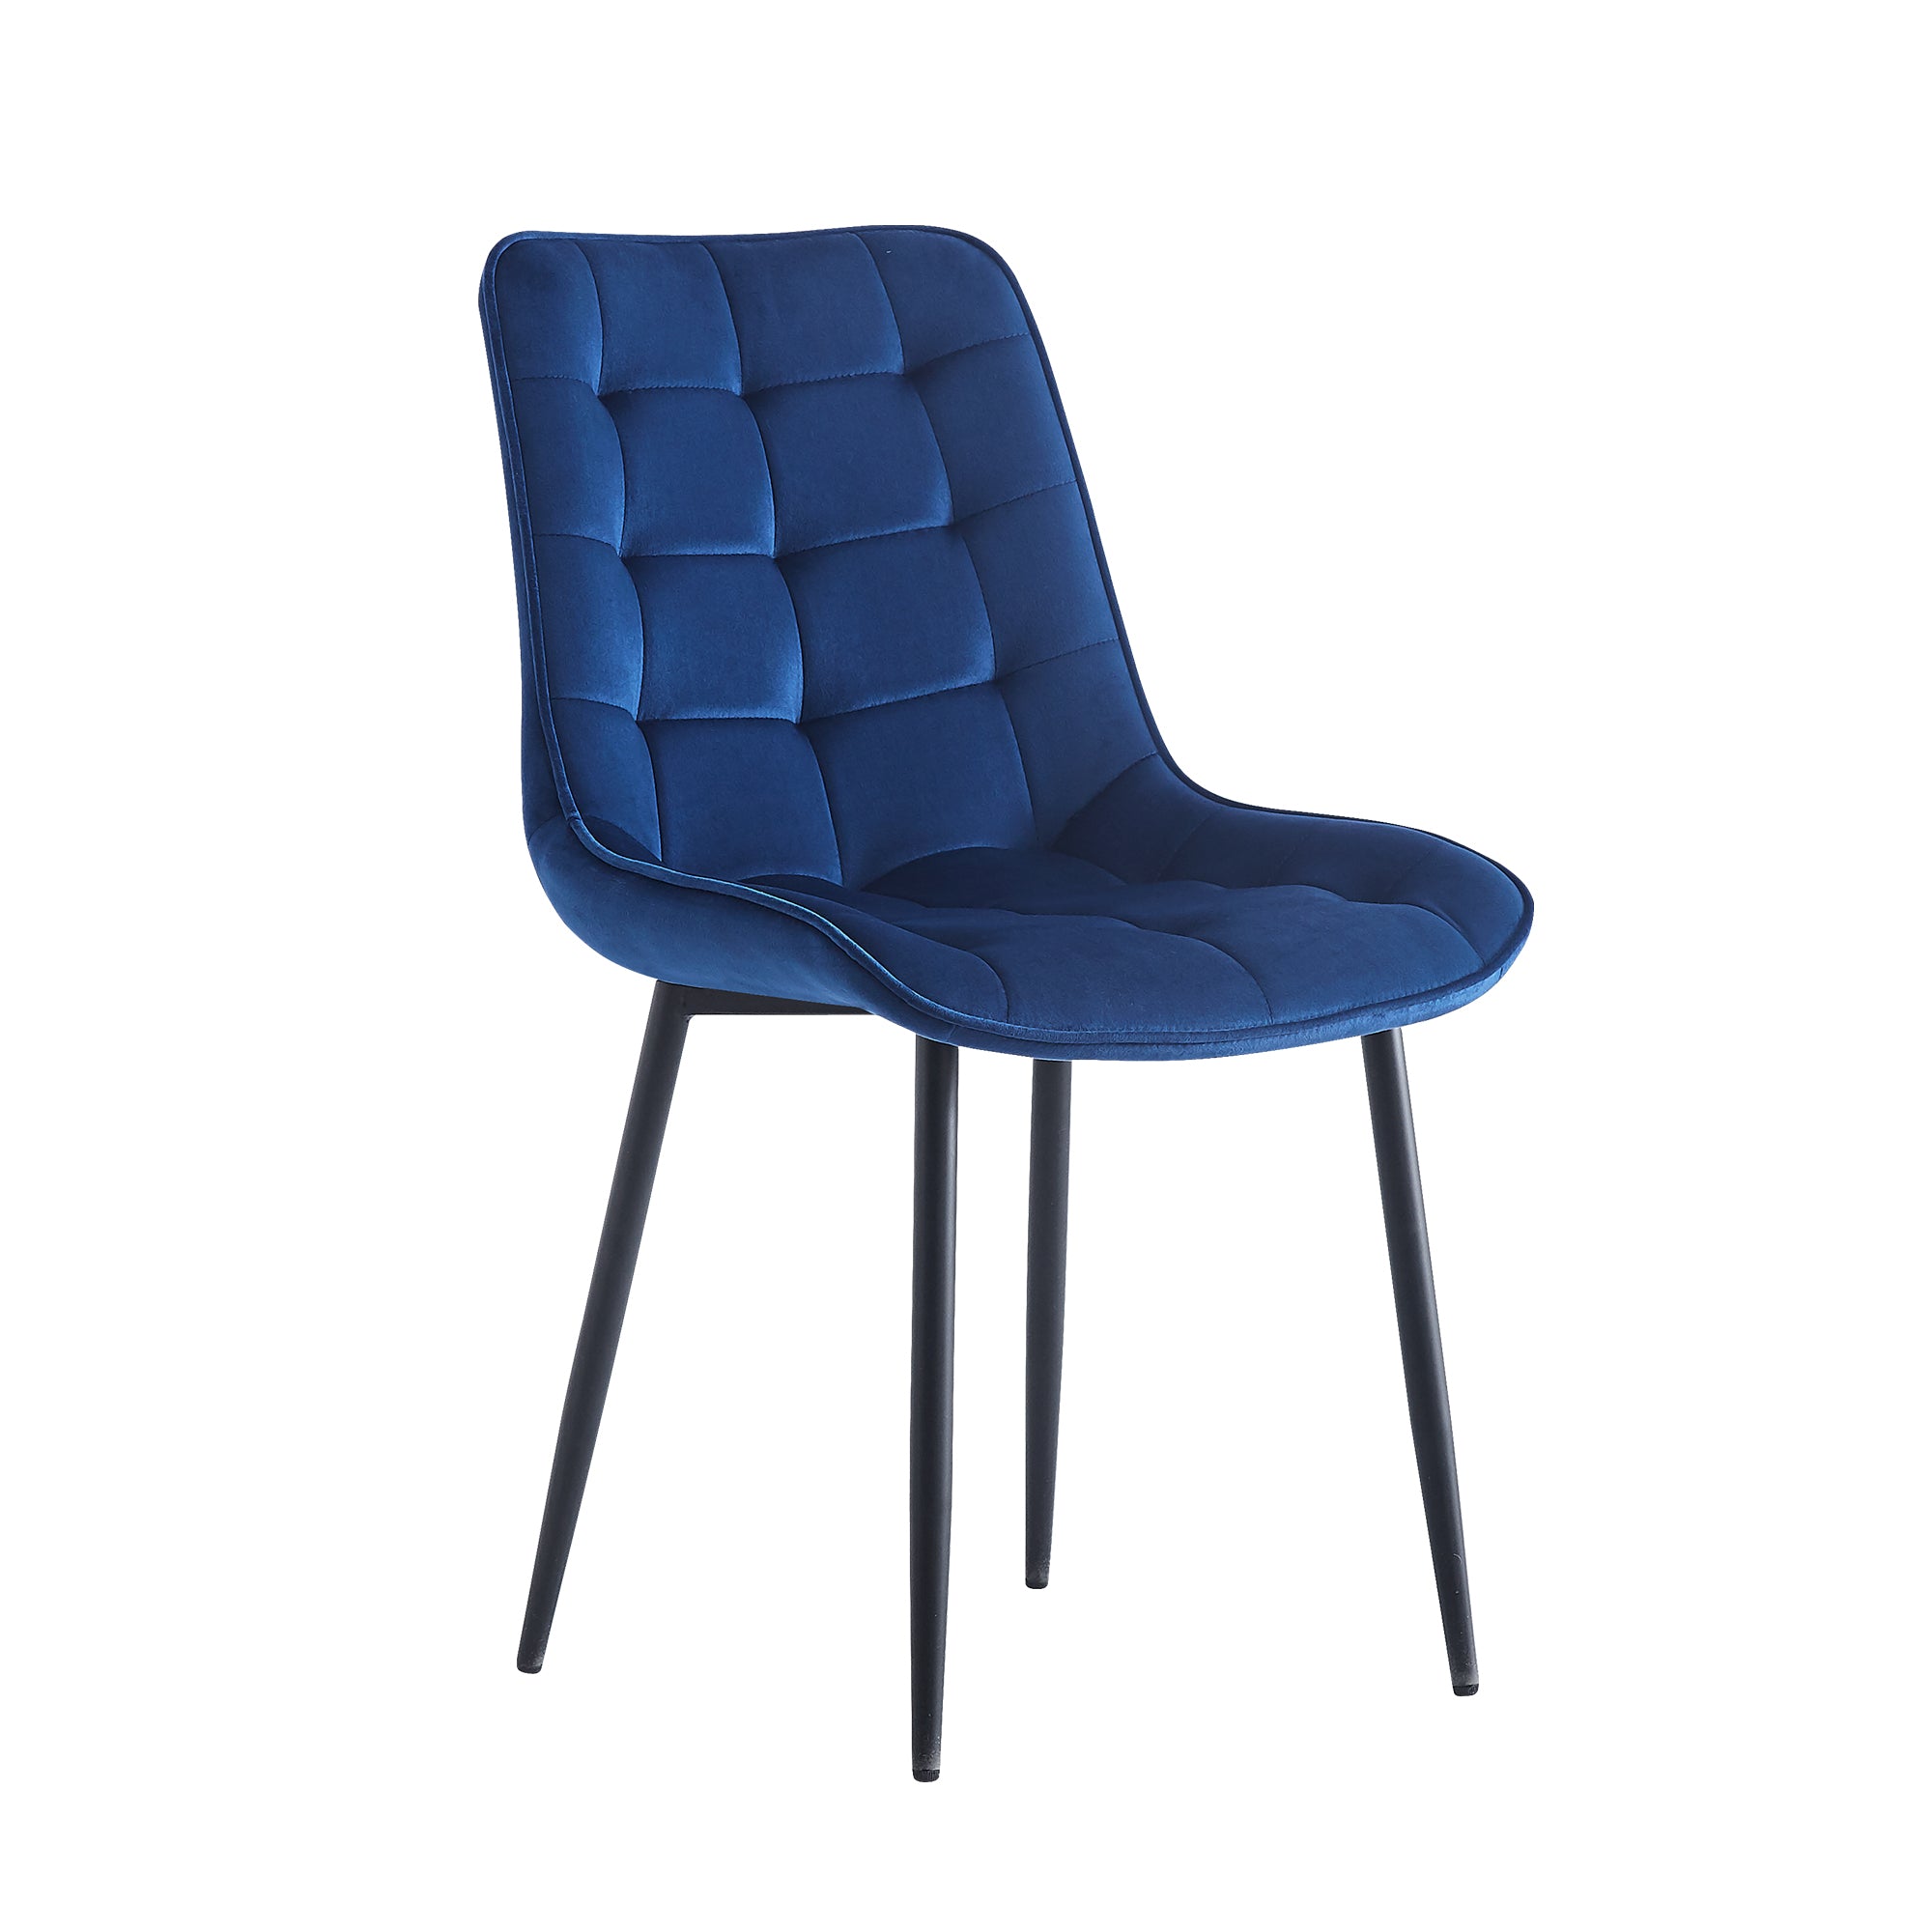 ZNTS Dining Chair 2PCSBLUEModern styleNew technologySuitable for restaurants, cafes, taverns, offices, W24062818